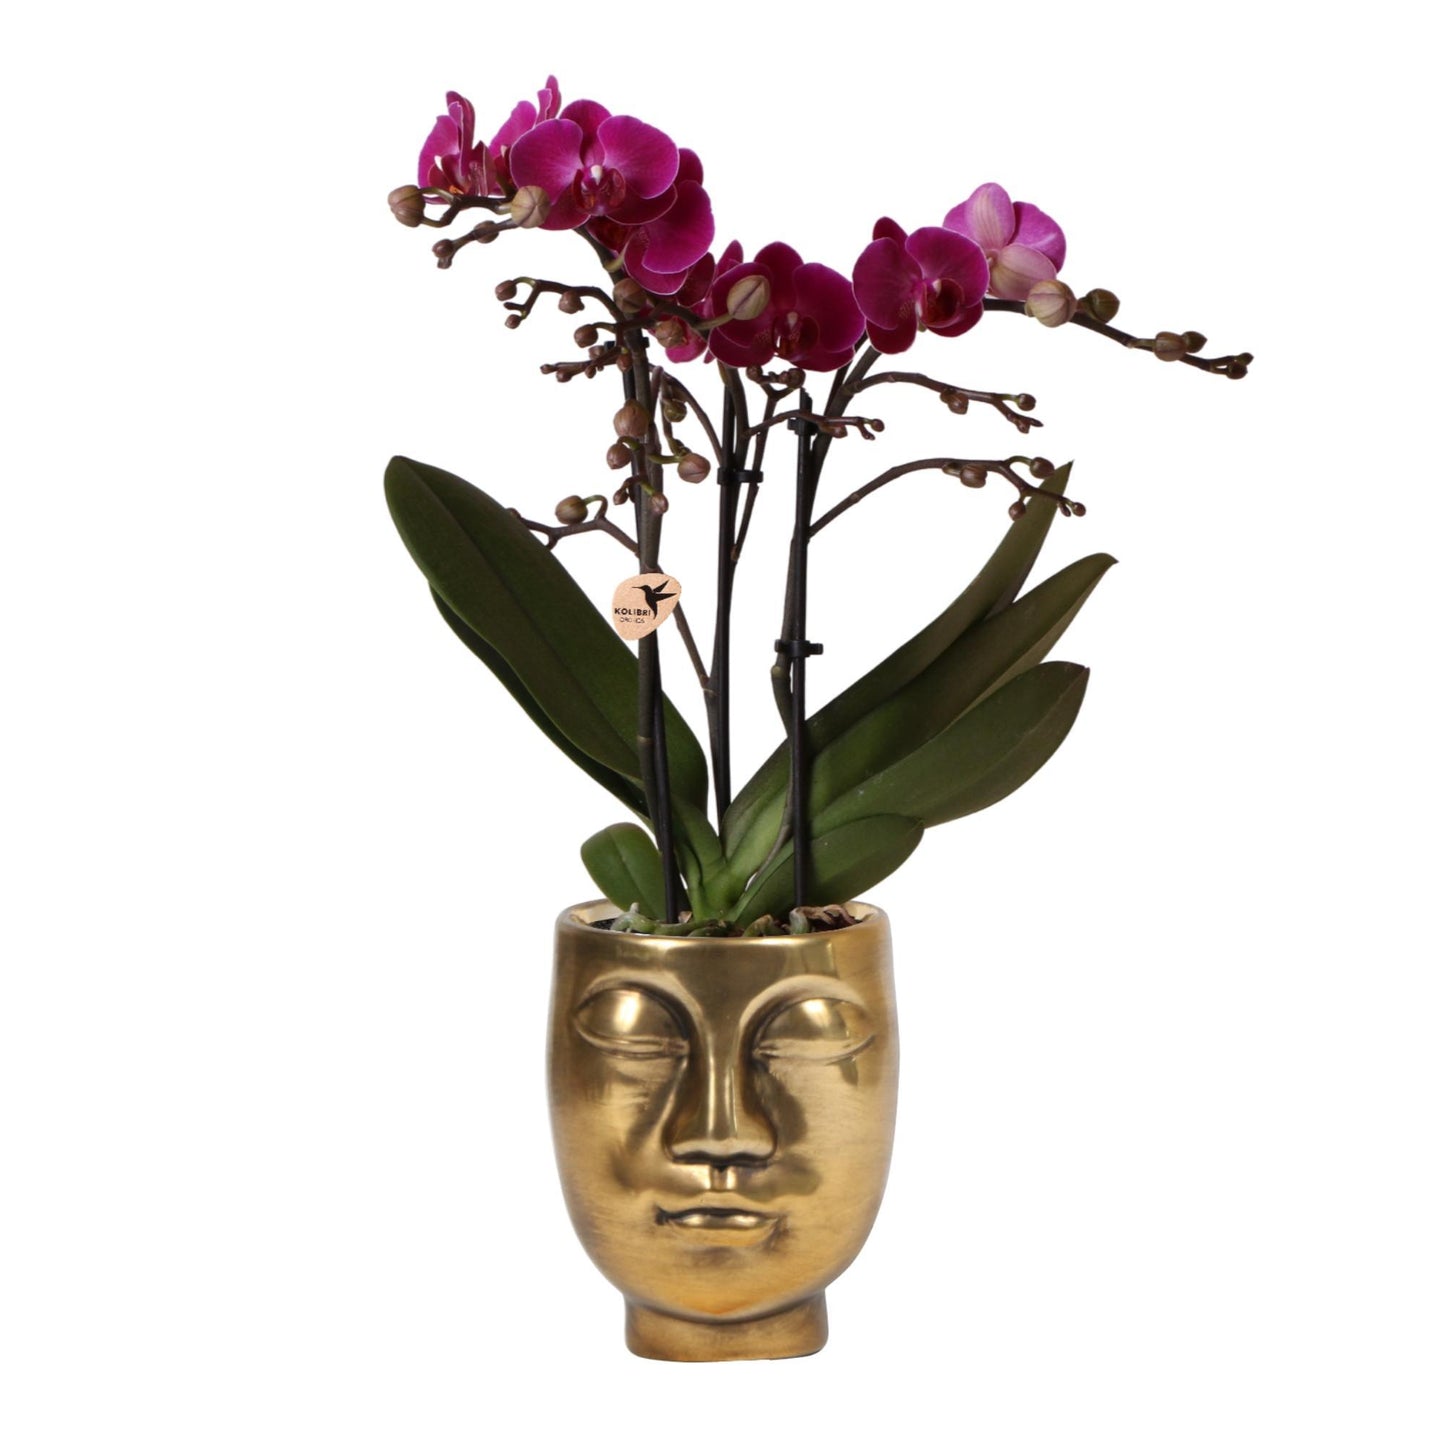 Hummingbird Orchids | purple Phalaenopsis orchid - Morelia + Face to Face ornamental pot gold - pot size Ø9cm - 45cm high | flowering houseplant - fresh from the grower